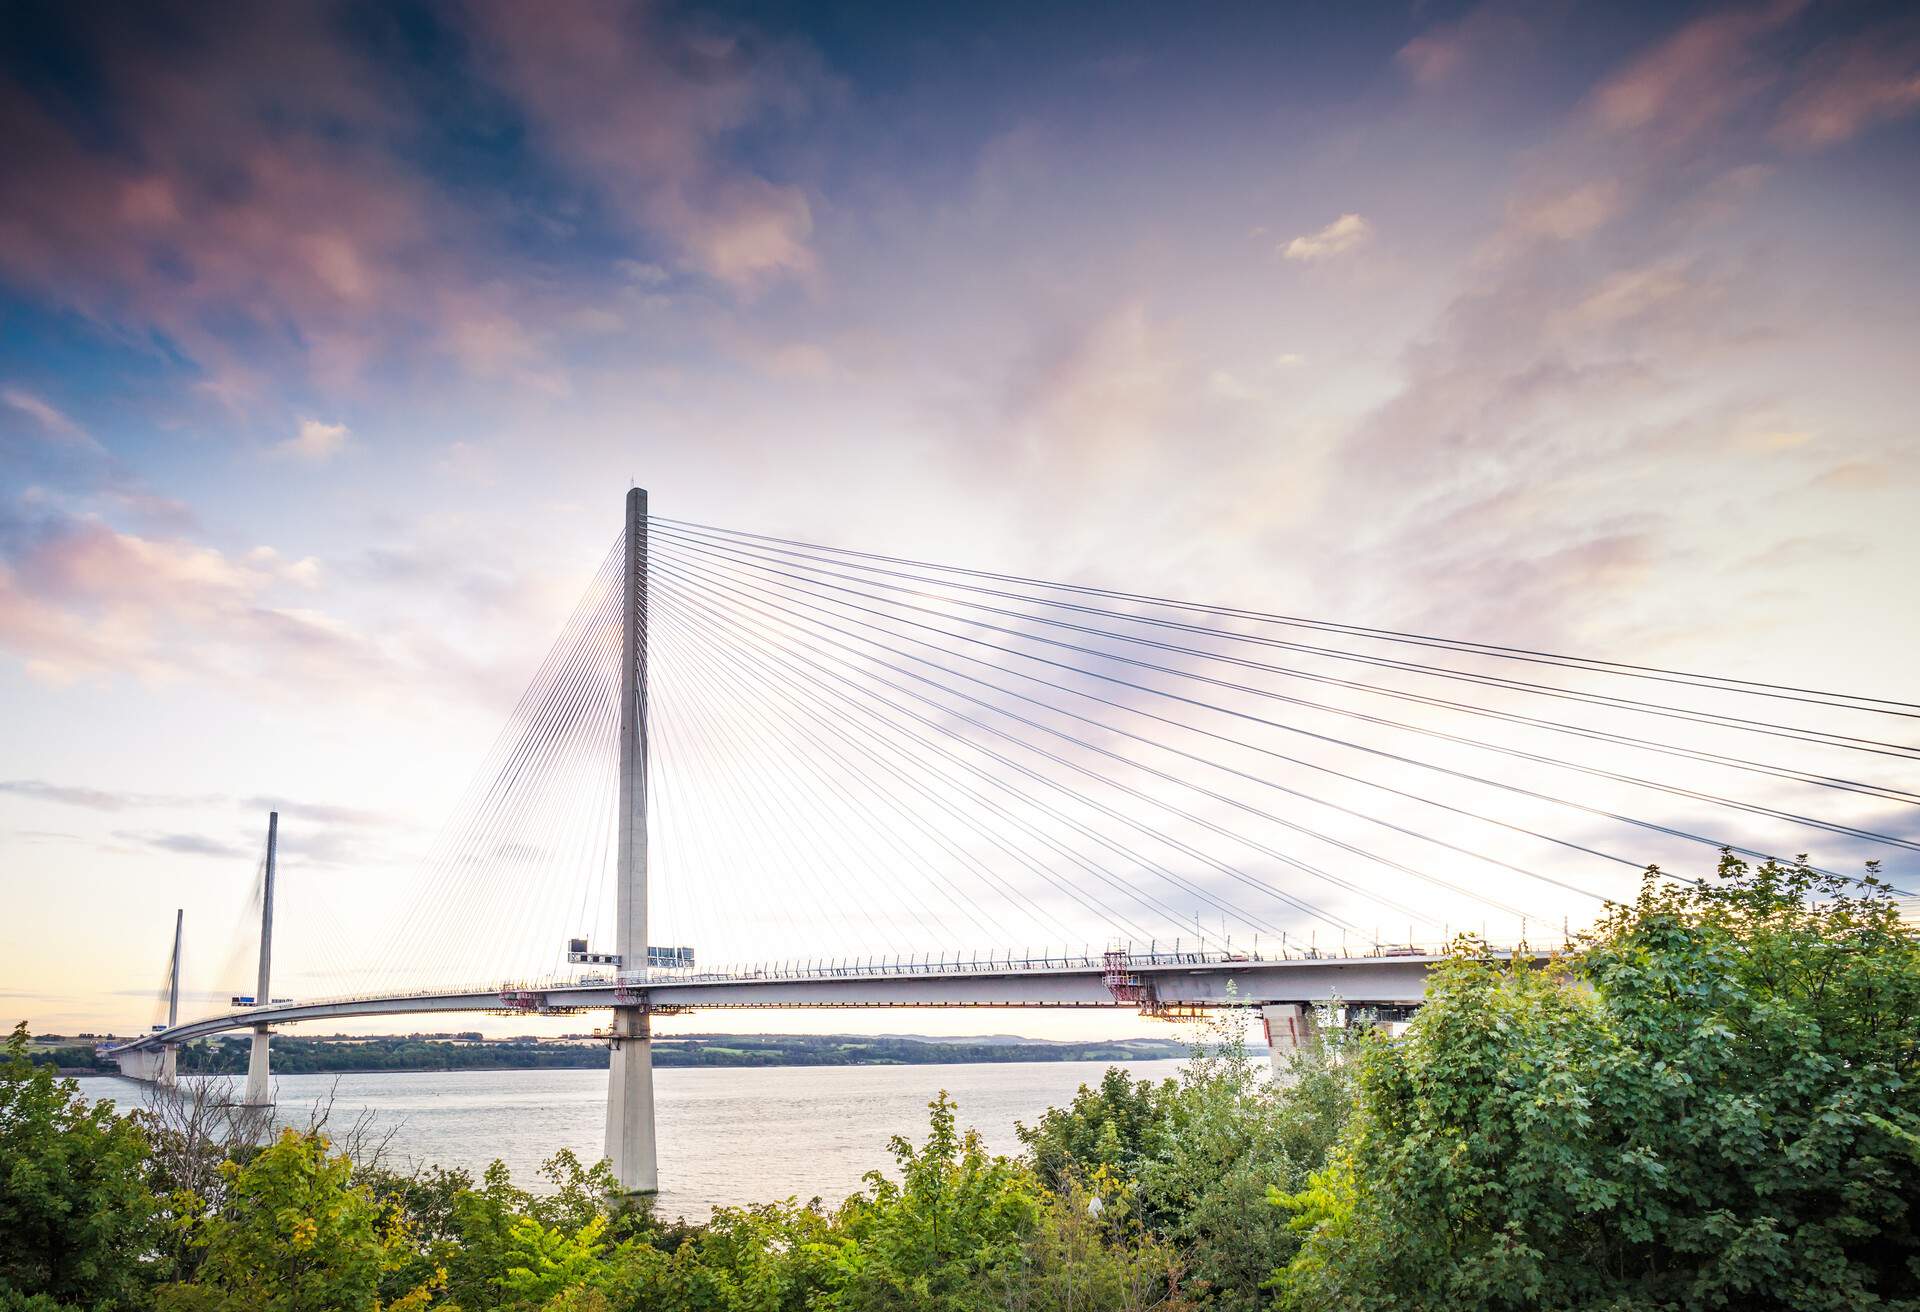 Opened in 2017, the Queensferry Crossing is the third bridge over the Firth of Forth, connecting Fife with the Lothians and Edinburgh.